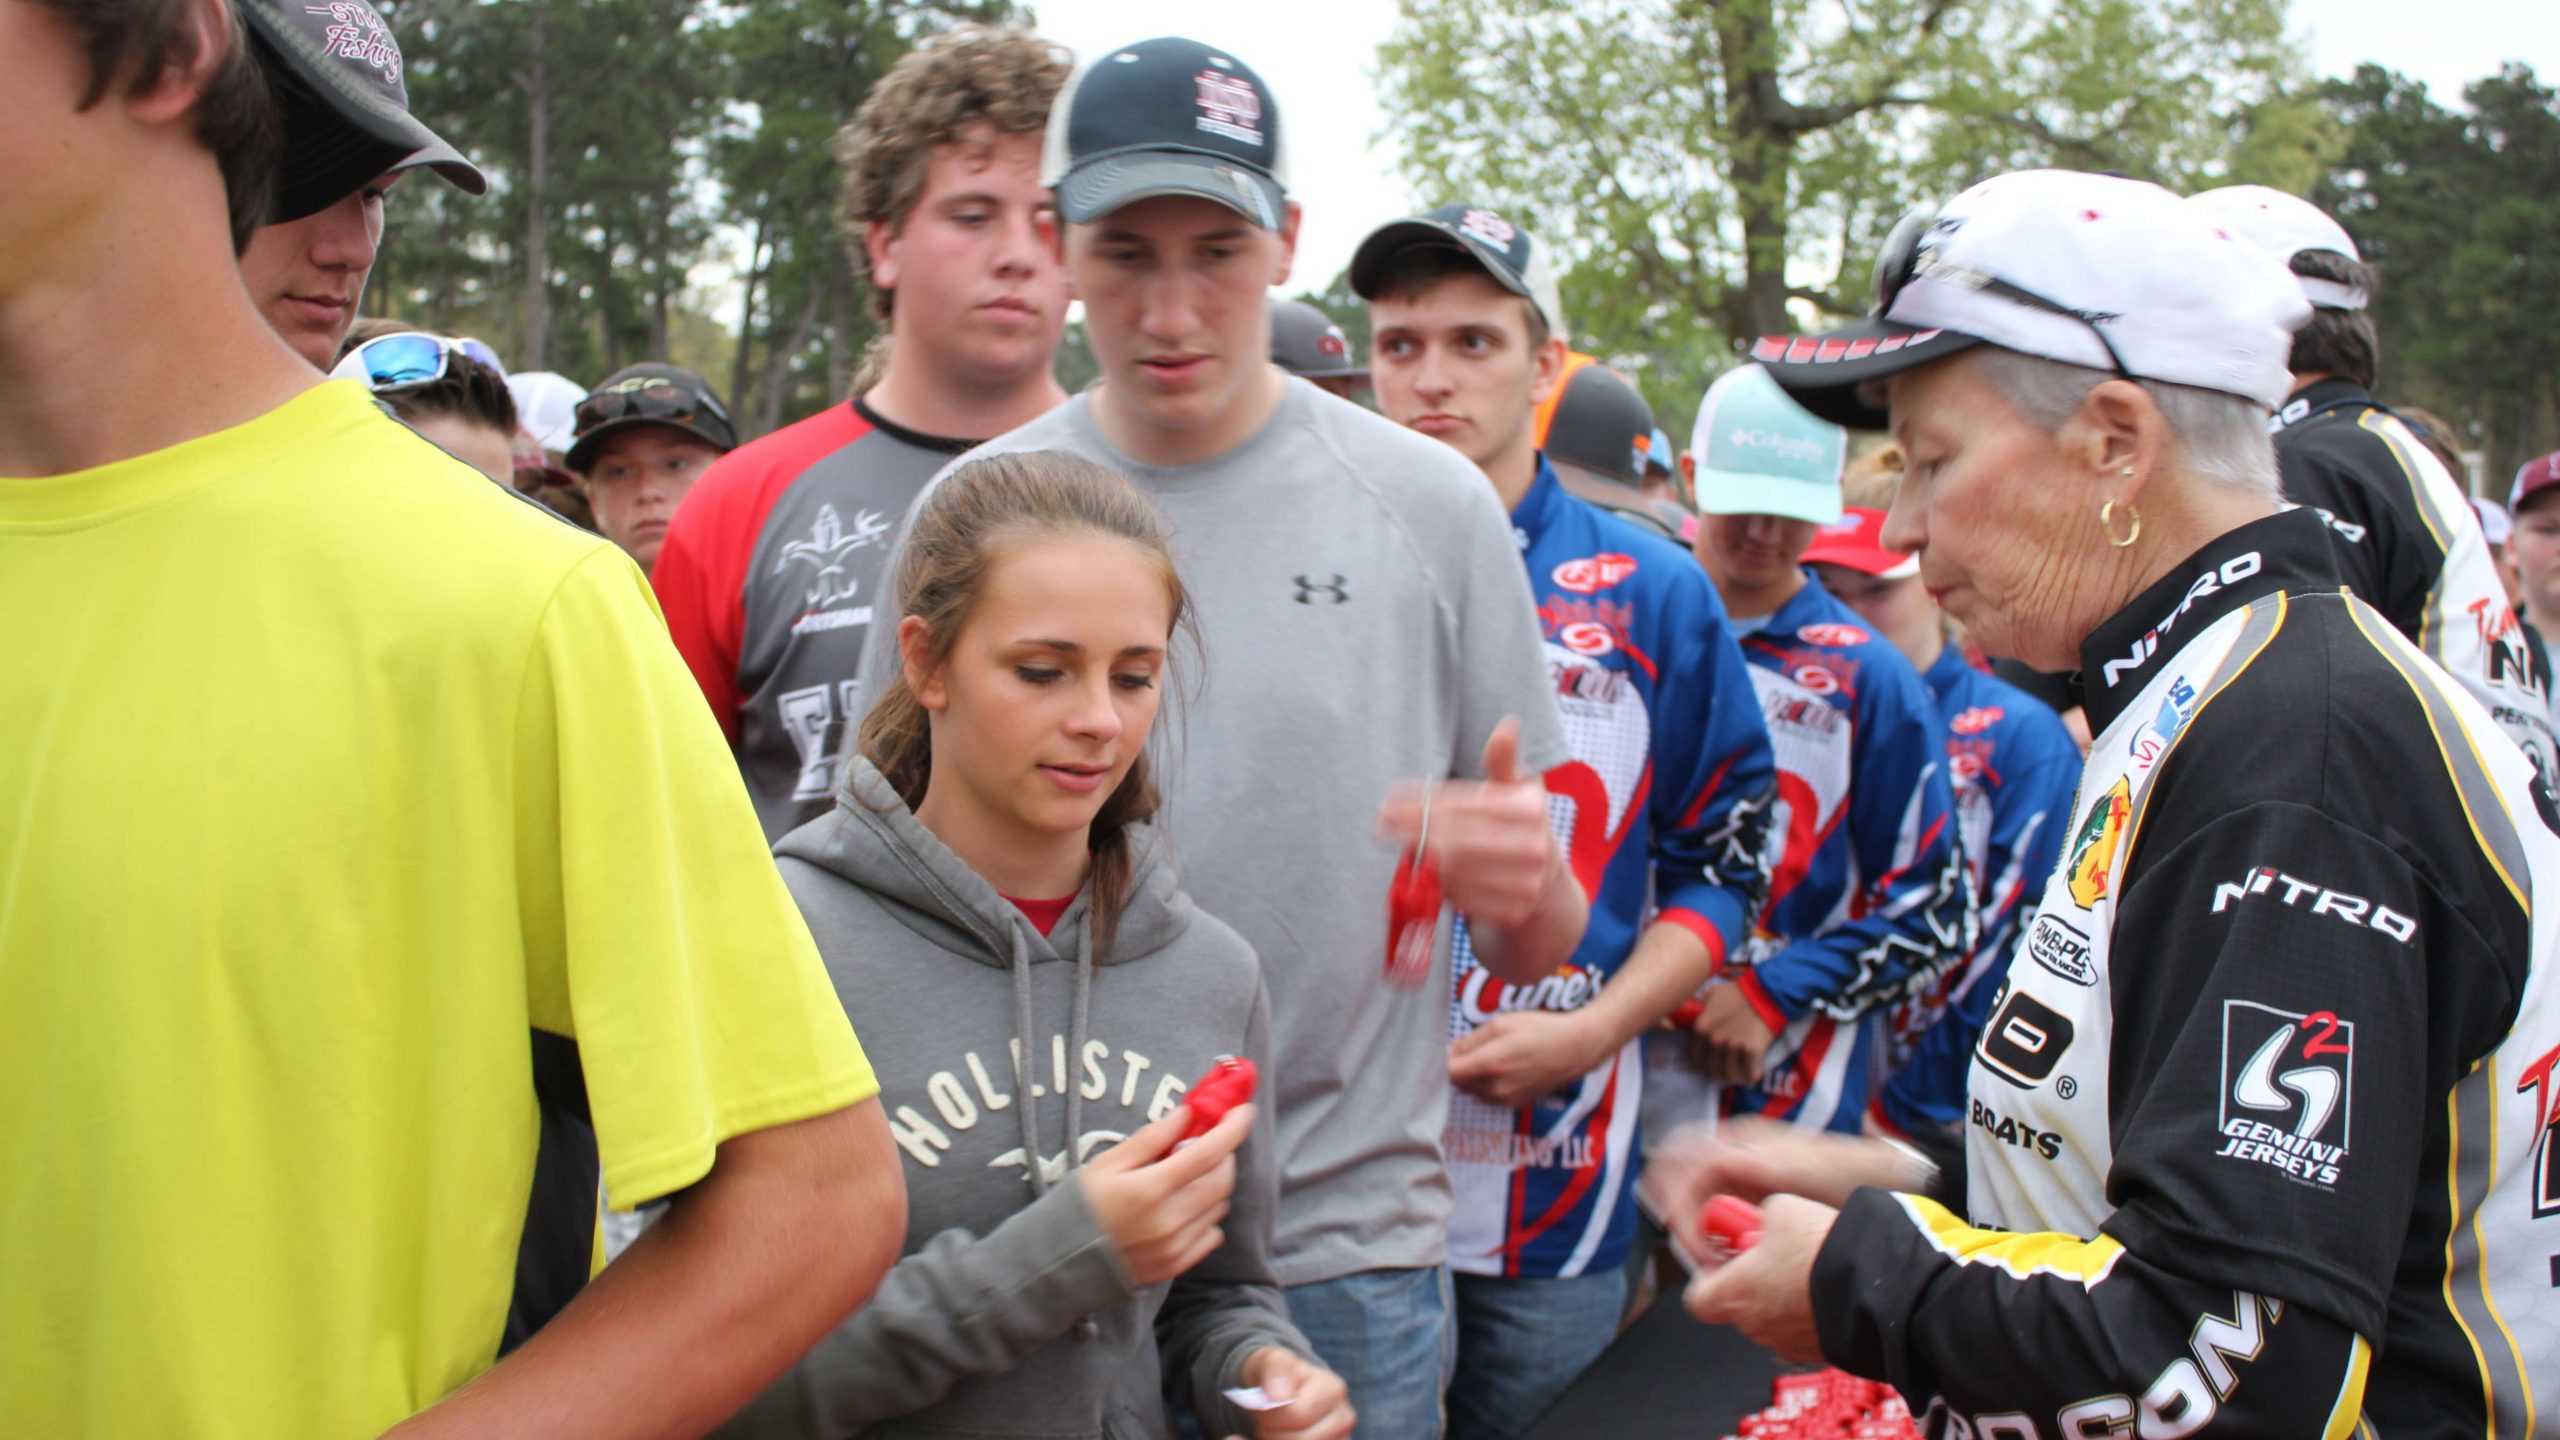 Cindy Breaux distributes the Toyota fobs to anglers.